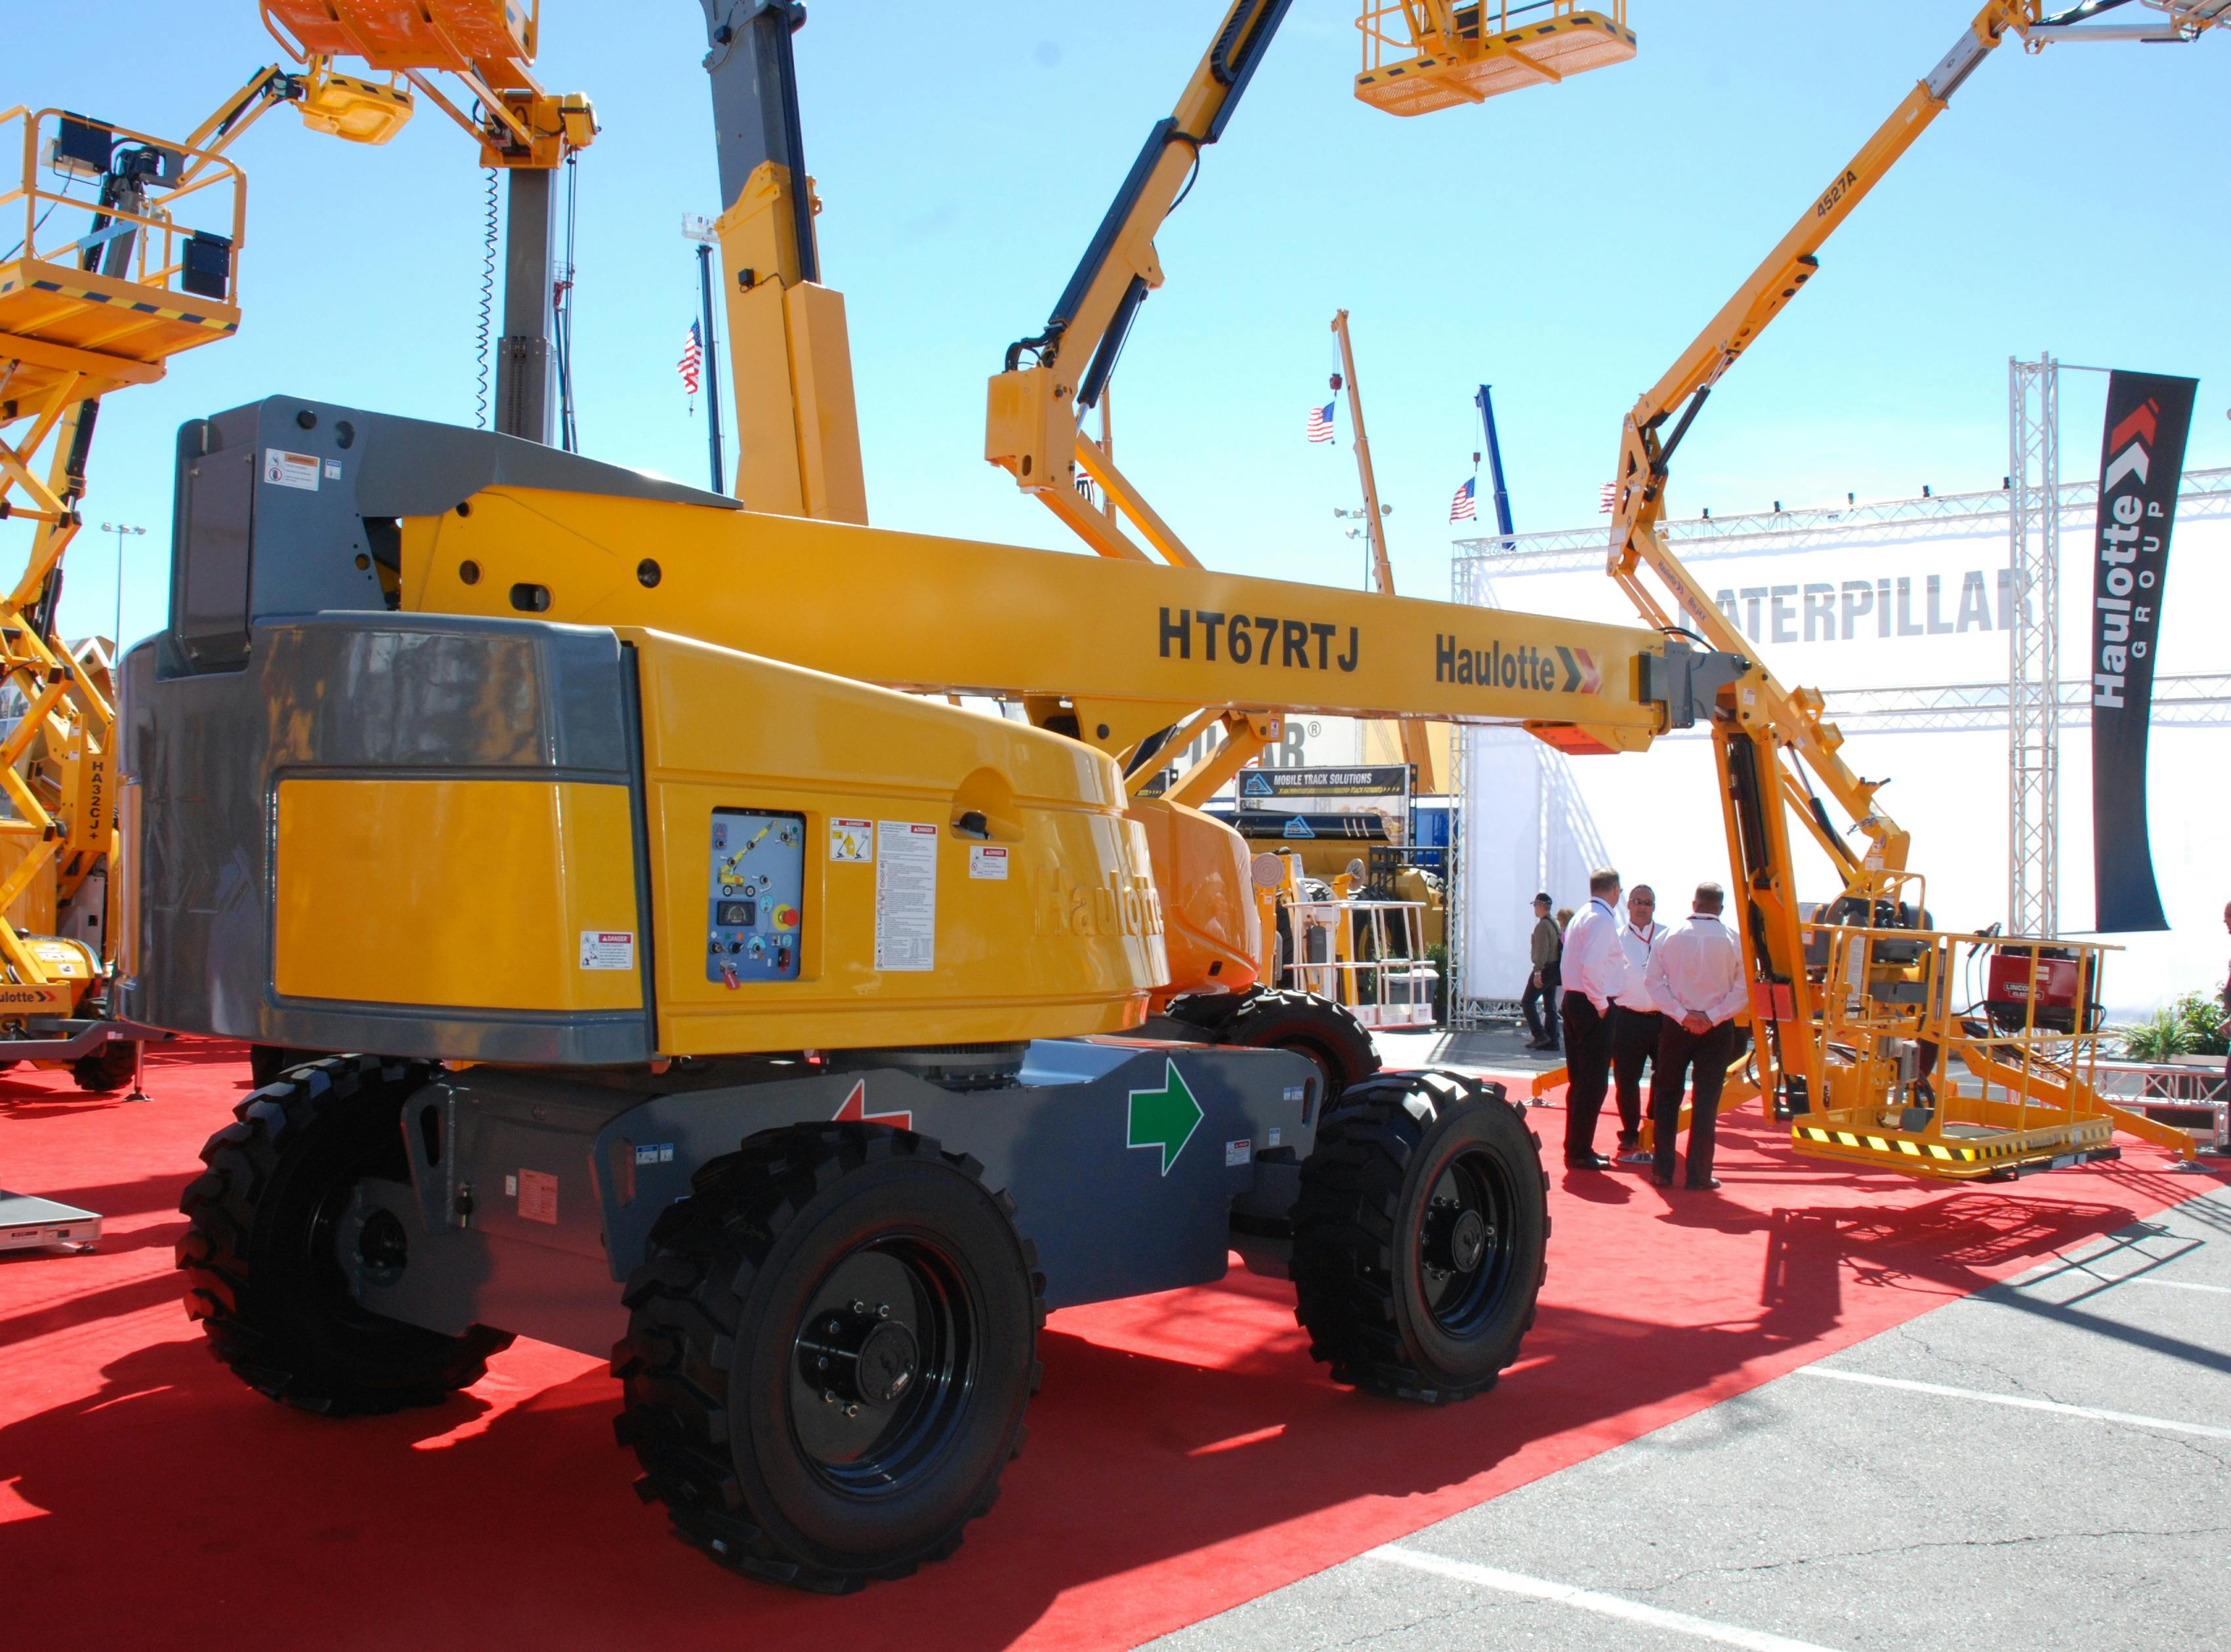 Haulotte Highlights Its New HT67RTJ Telescopic Boom at ConExpo | Powered Access